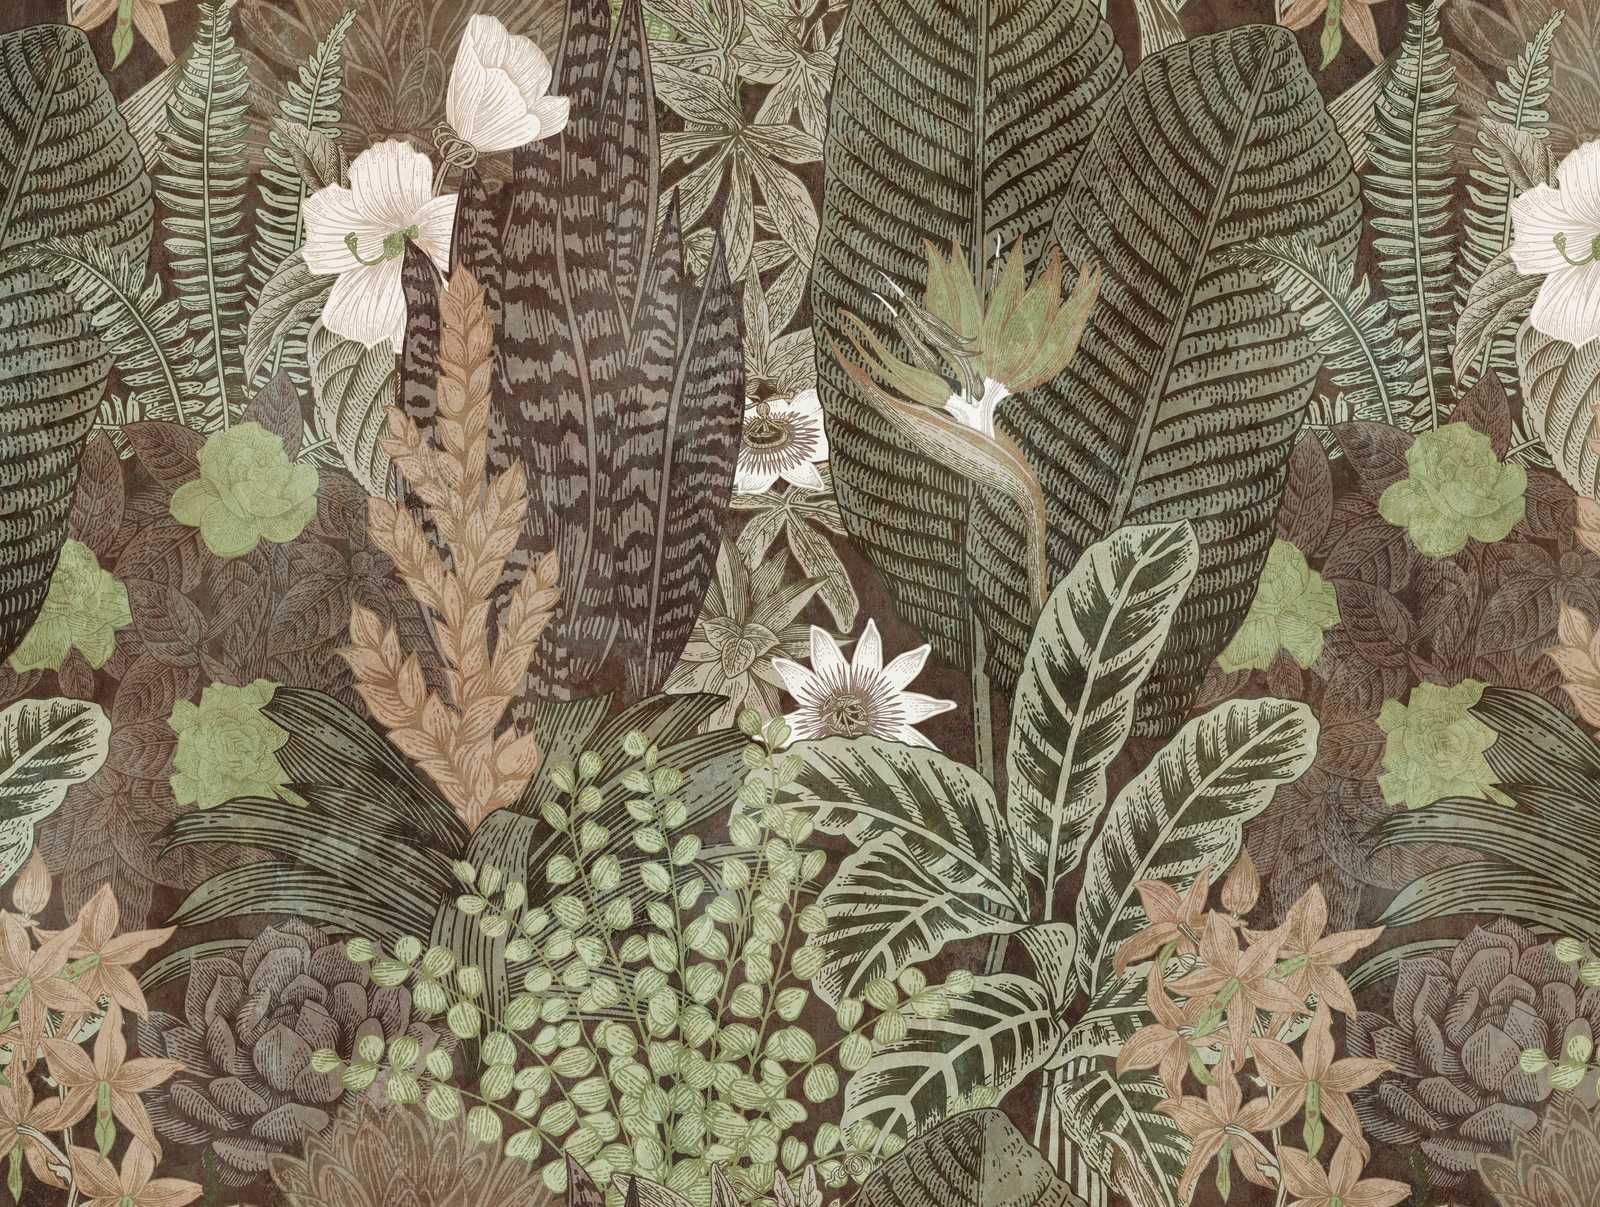             Wallpaper novelty - motif wallpaper nature design in drawing style, brown & green
        